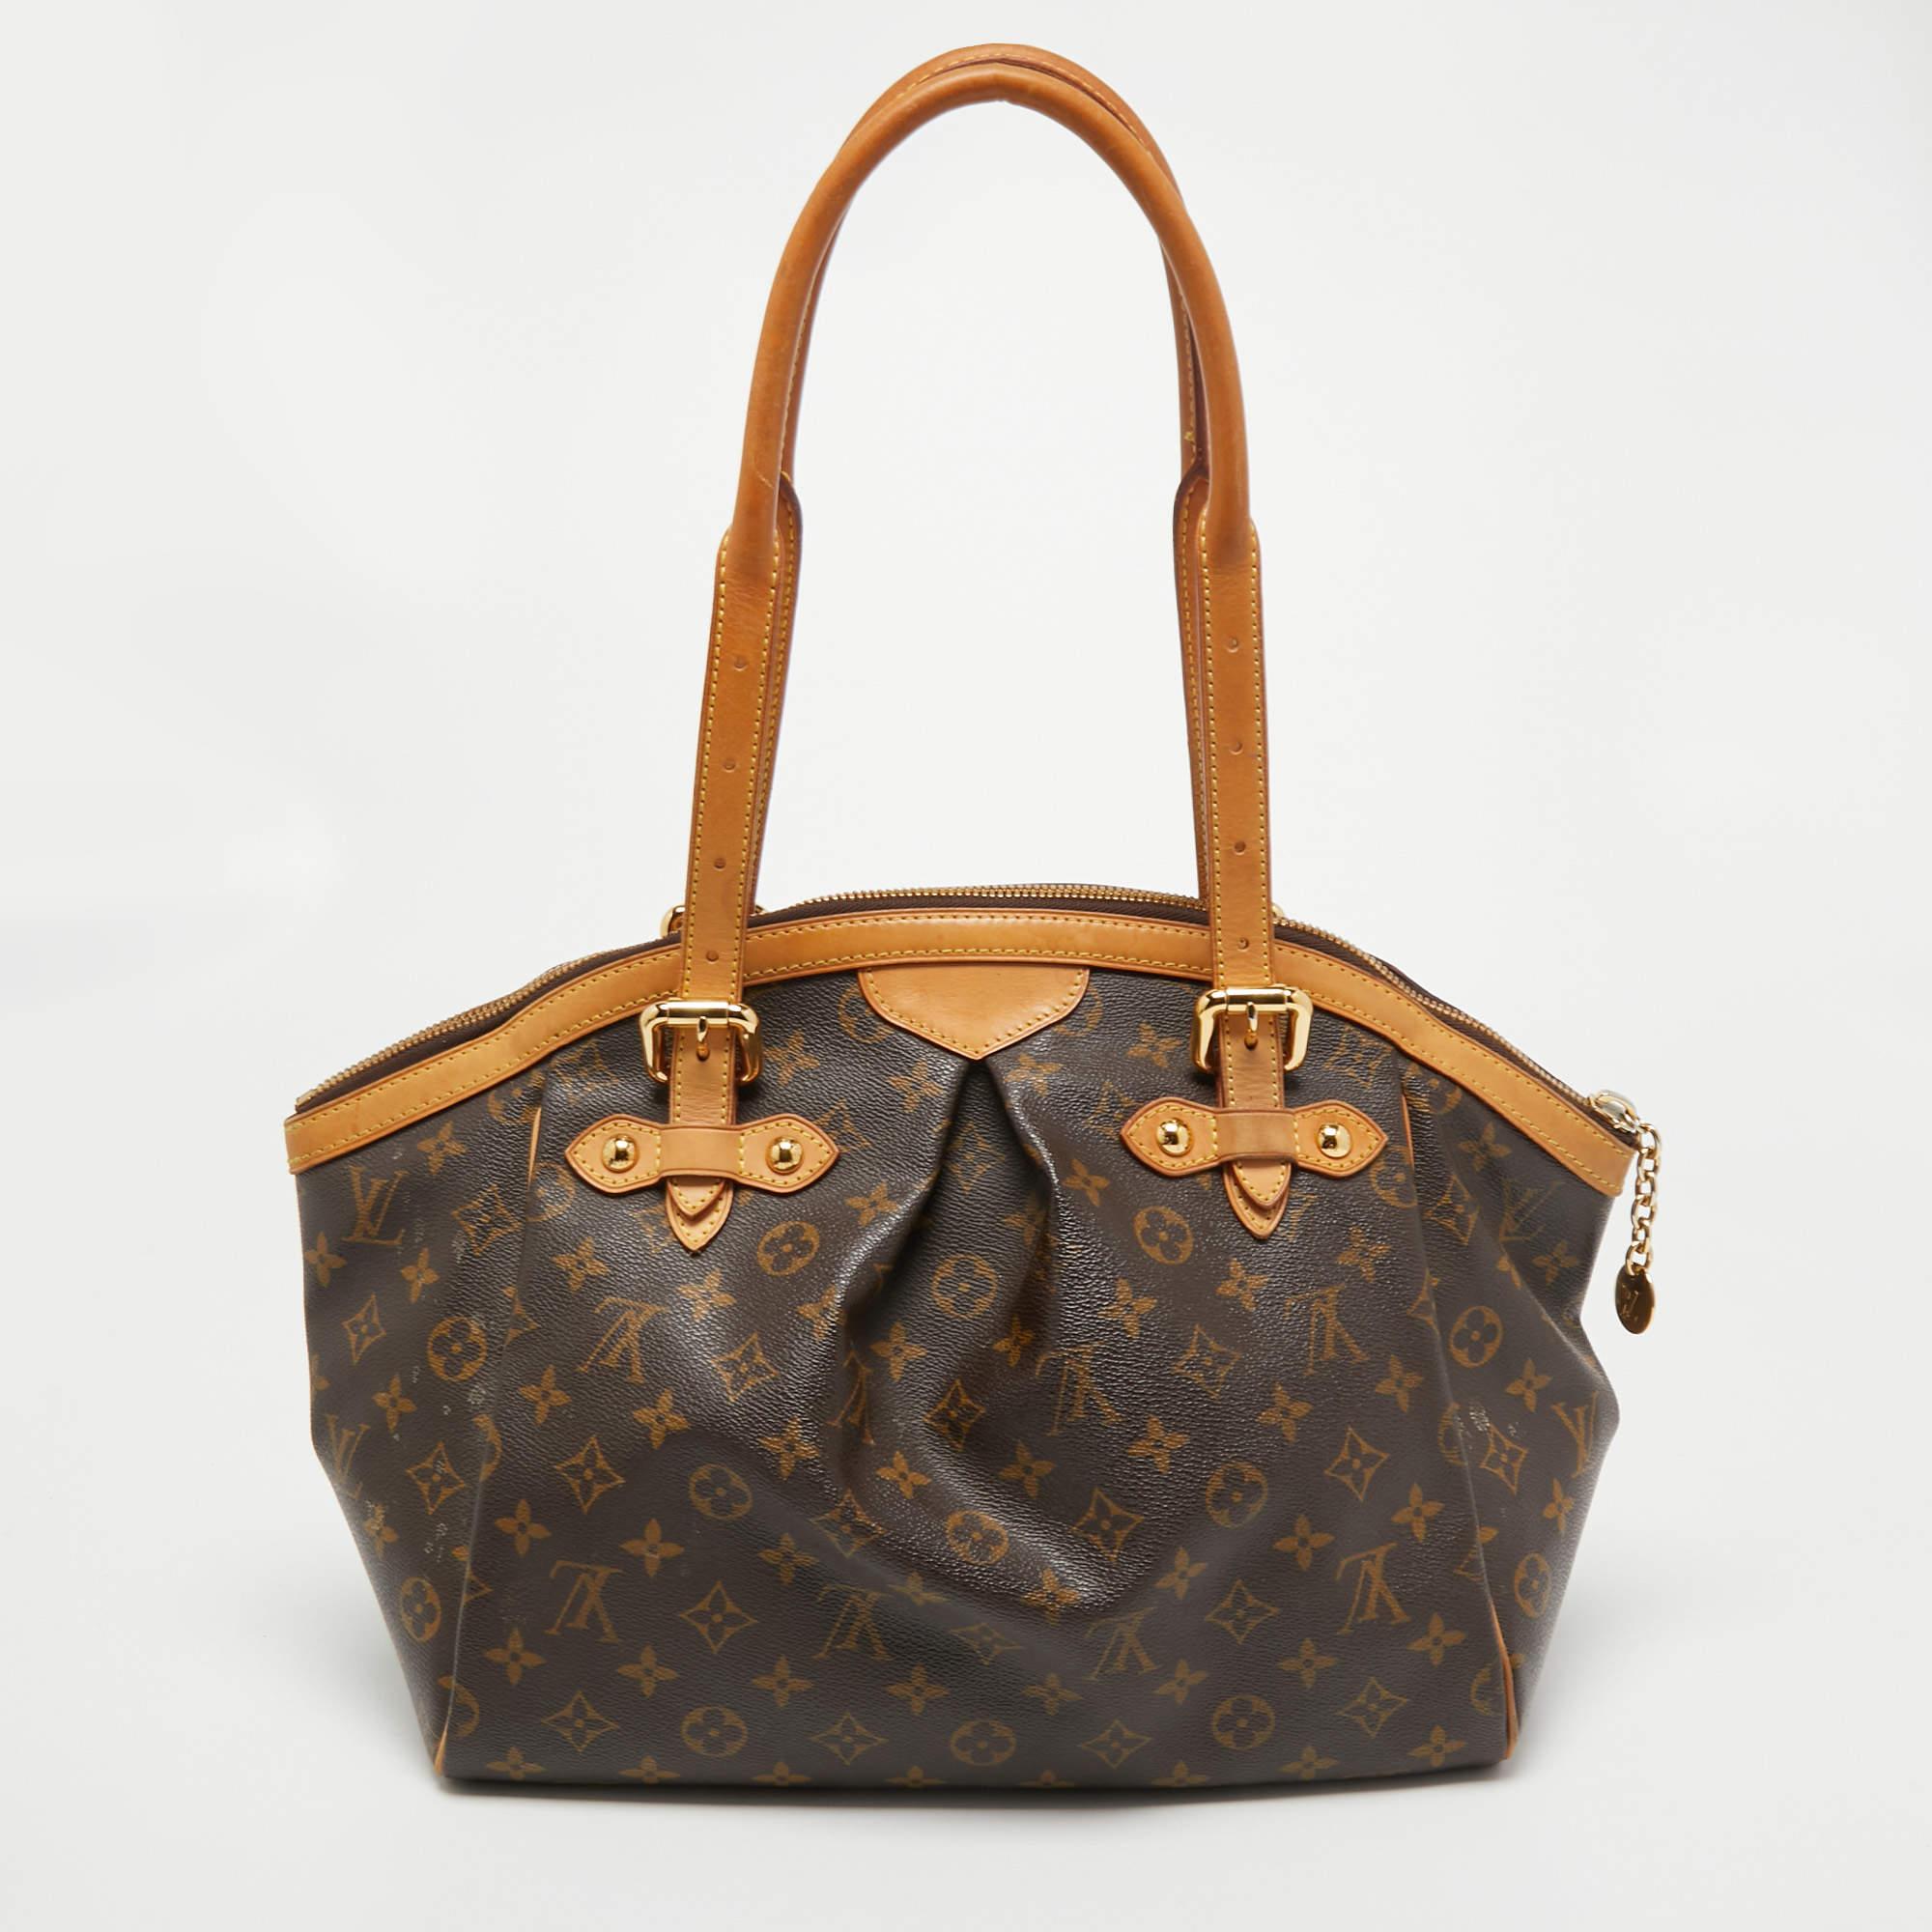 Everybody wants a handbag as good as this one. From the house of Louis Vuitton comes this gorgeous Tivoli bag that is both stylish and handy. Crafted from Monogram canvas, the bag has two sturdy handles and protective metal feet. It has a top zipper